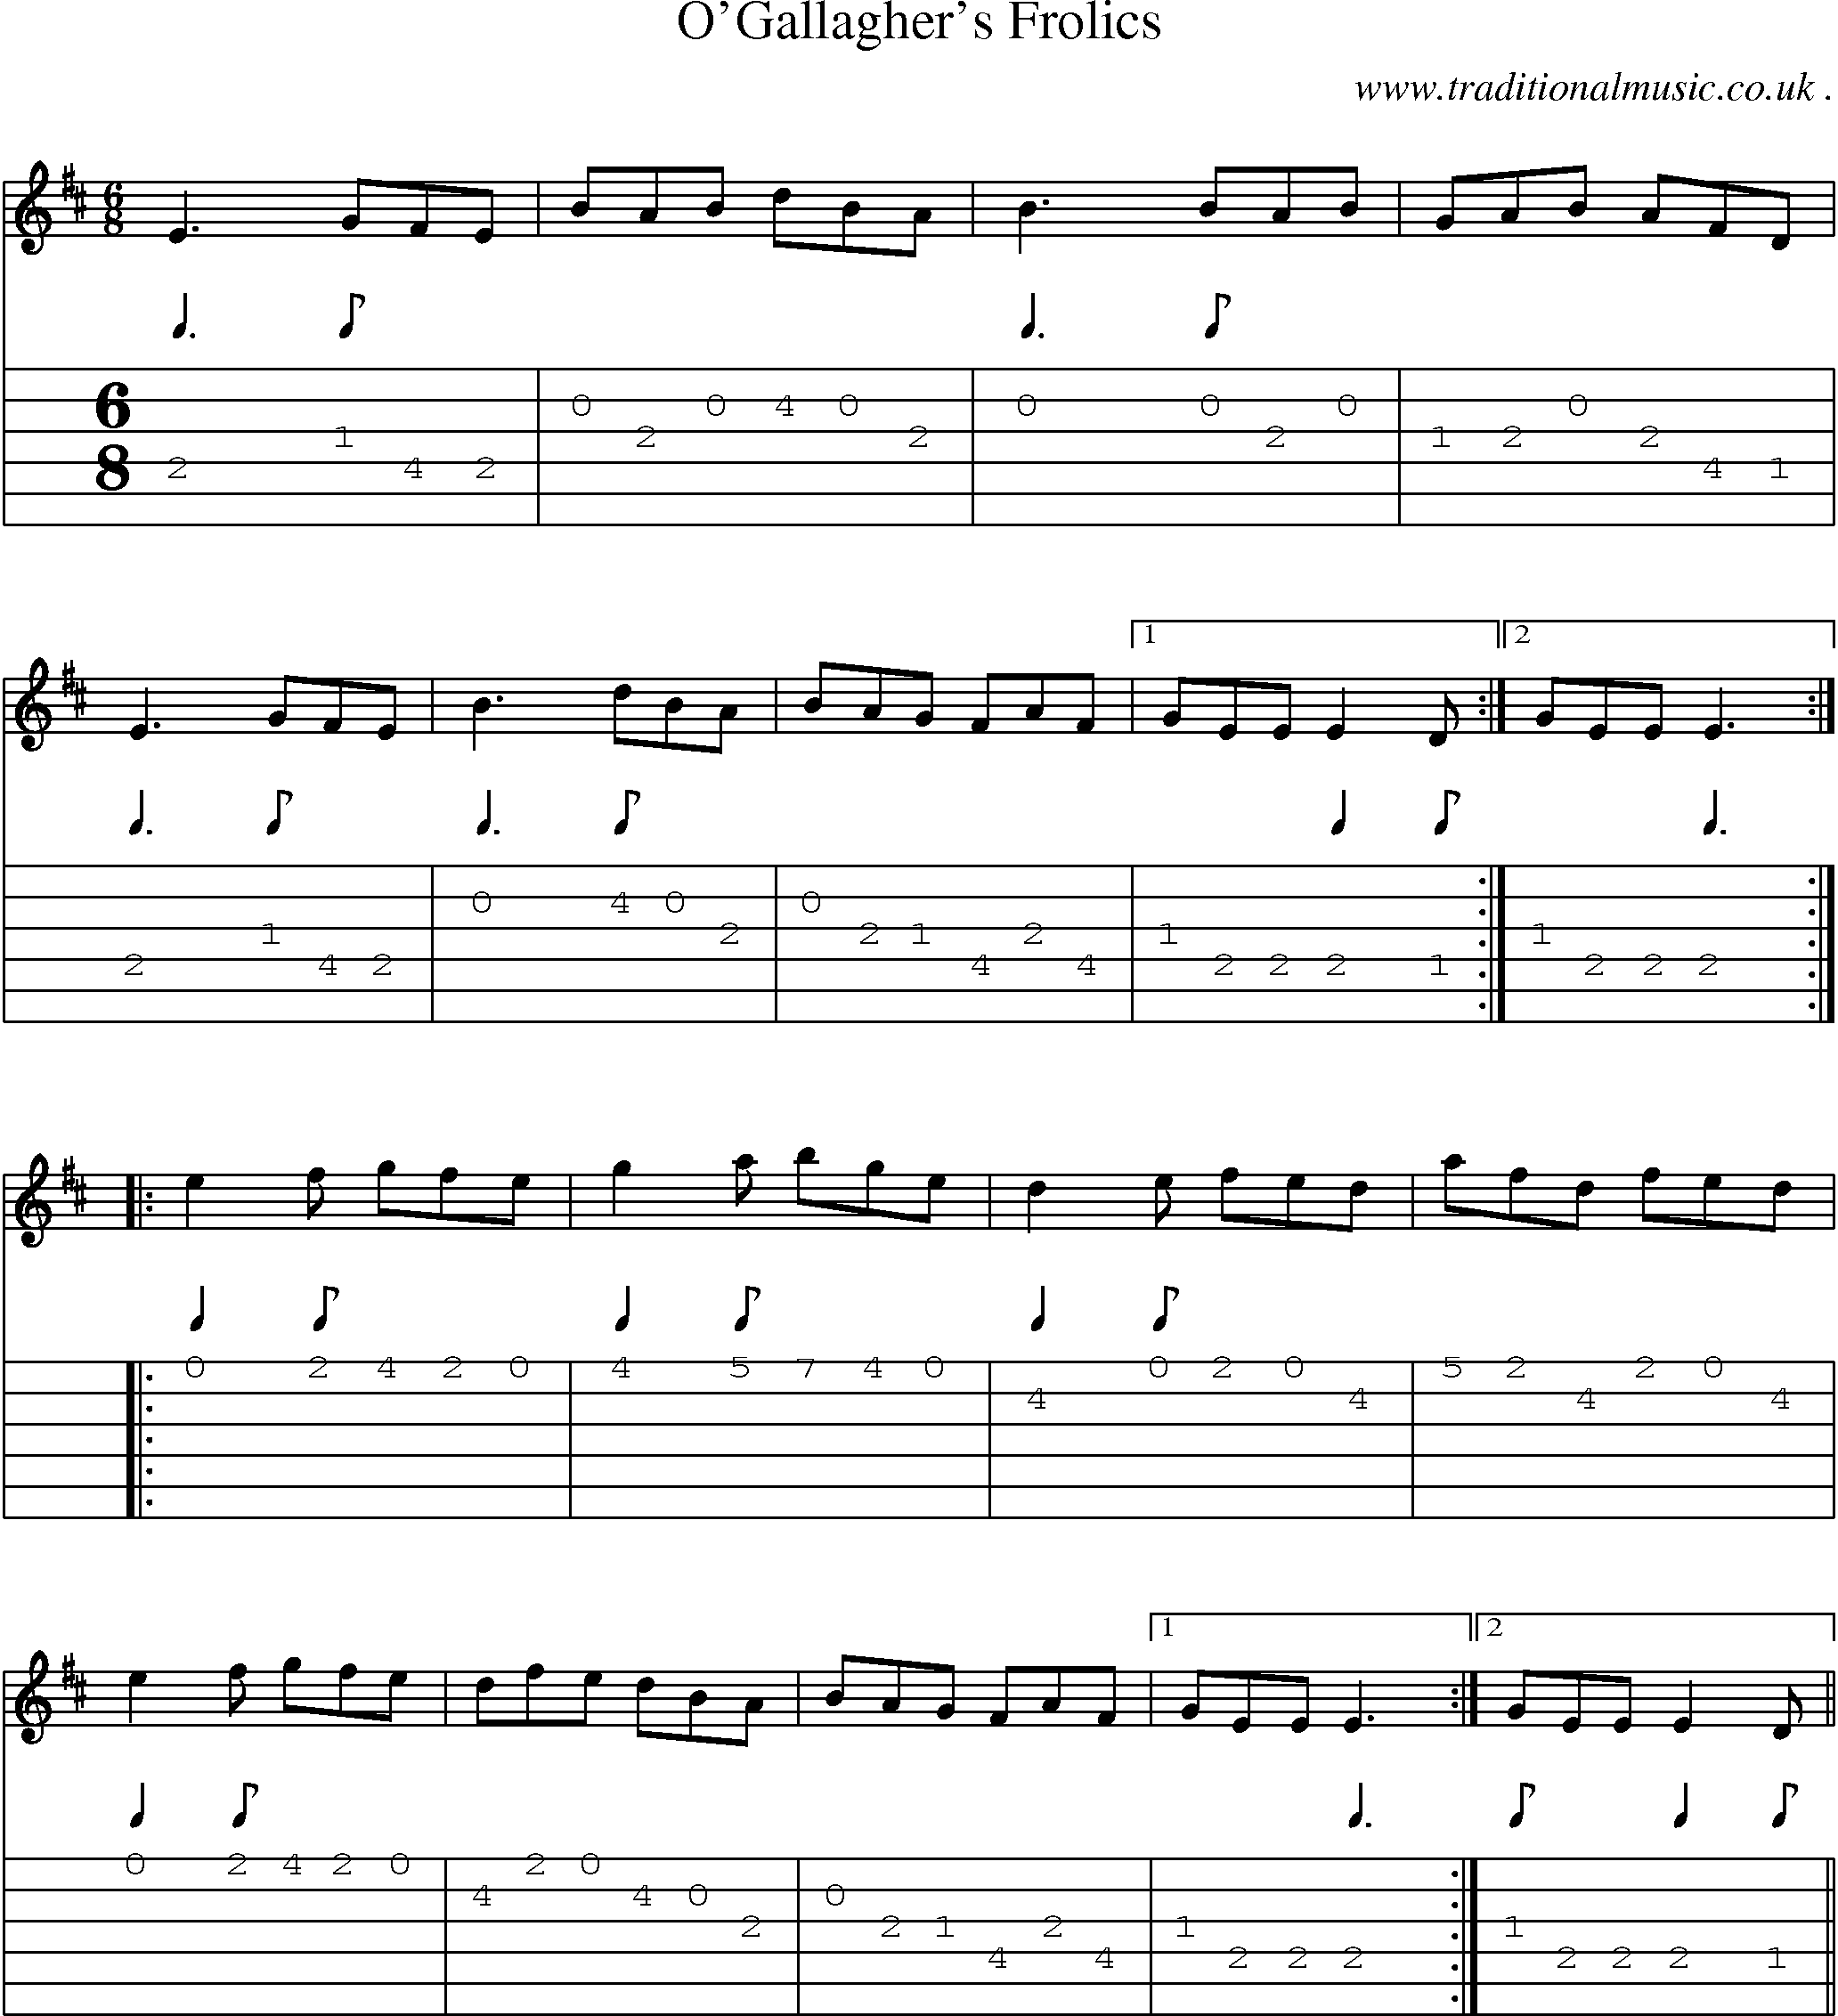 Sheet-Music and Guitar Tabs for Ogallaghers Frolics